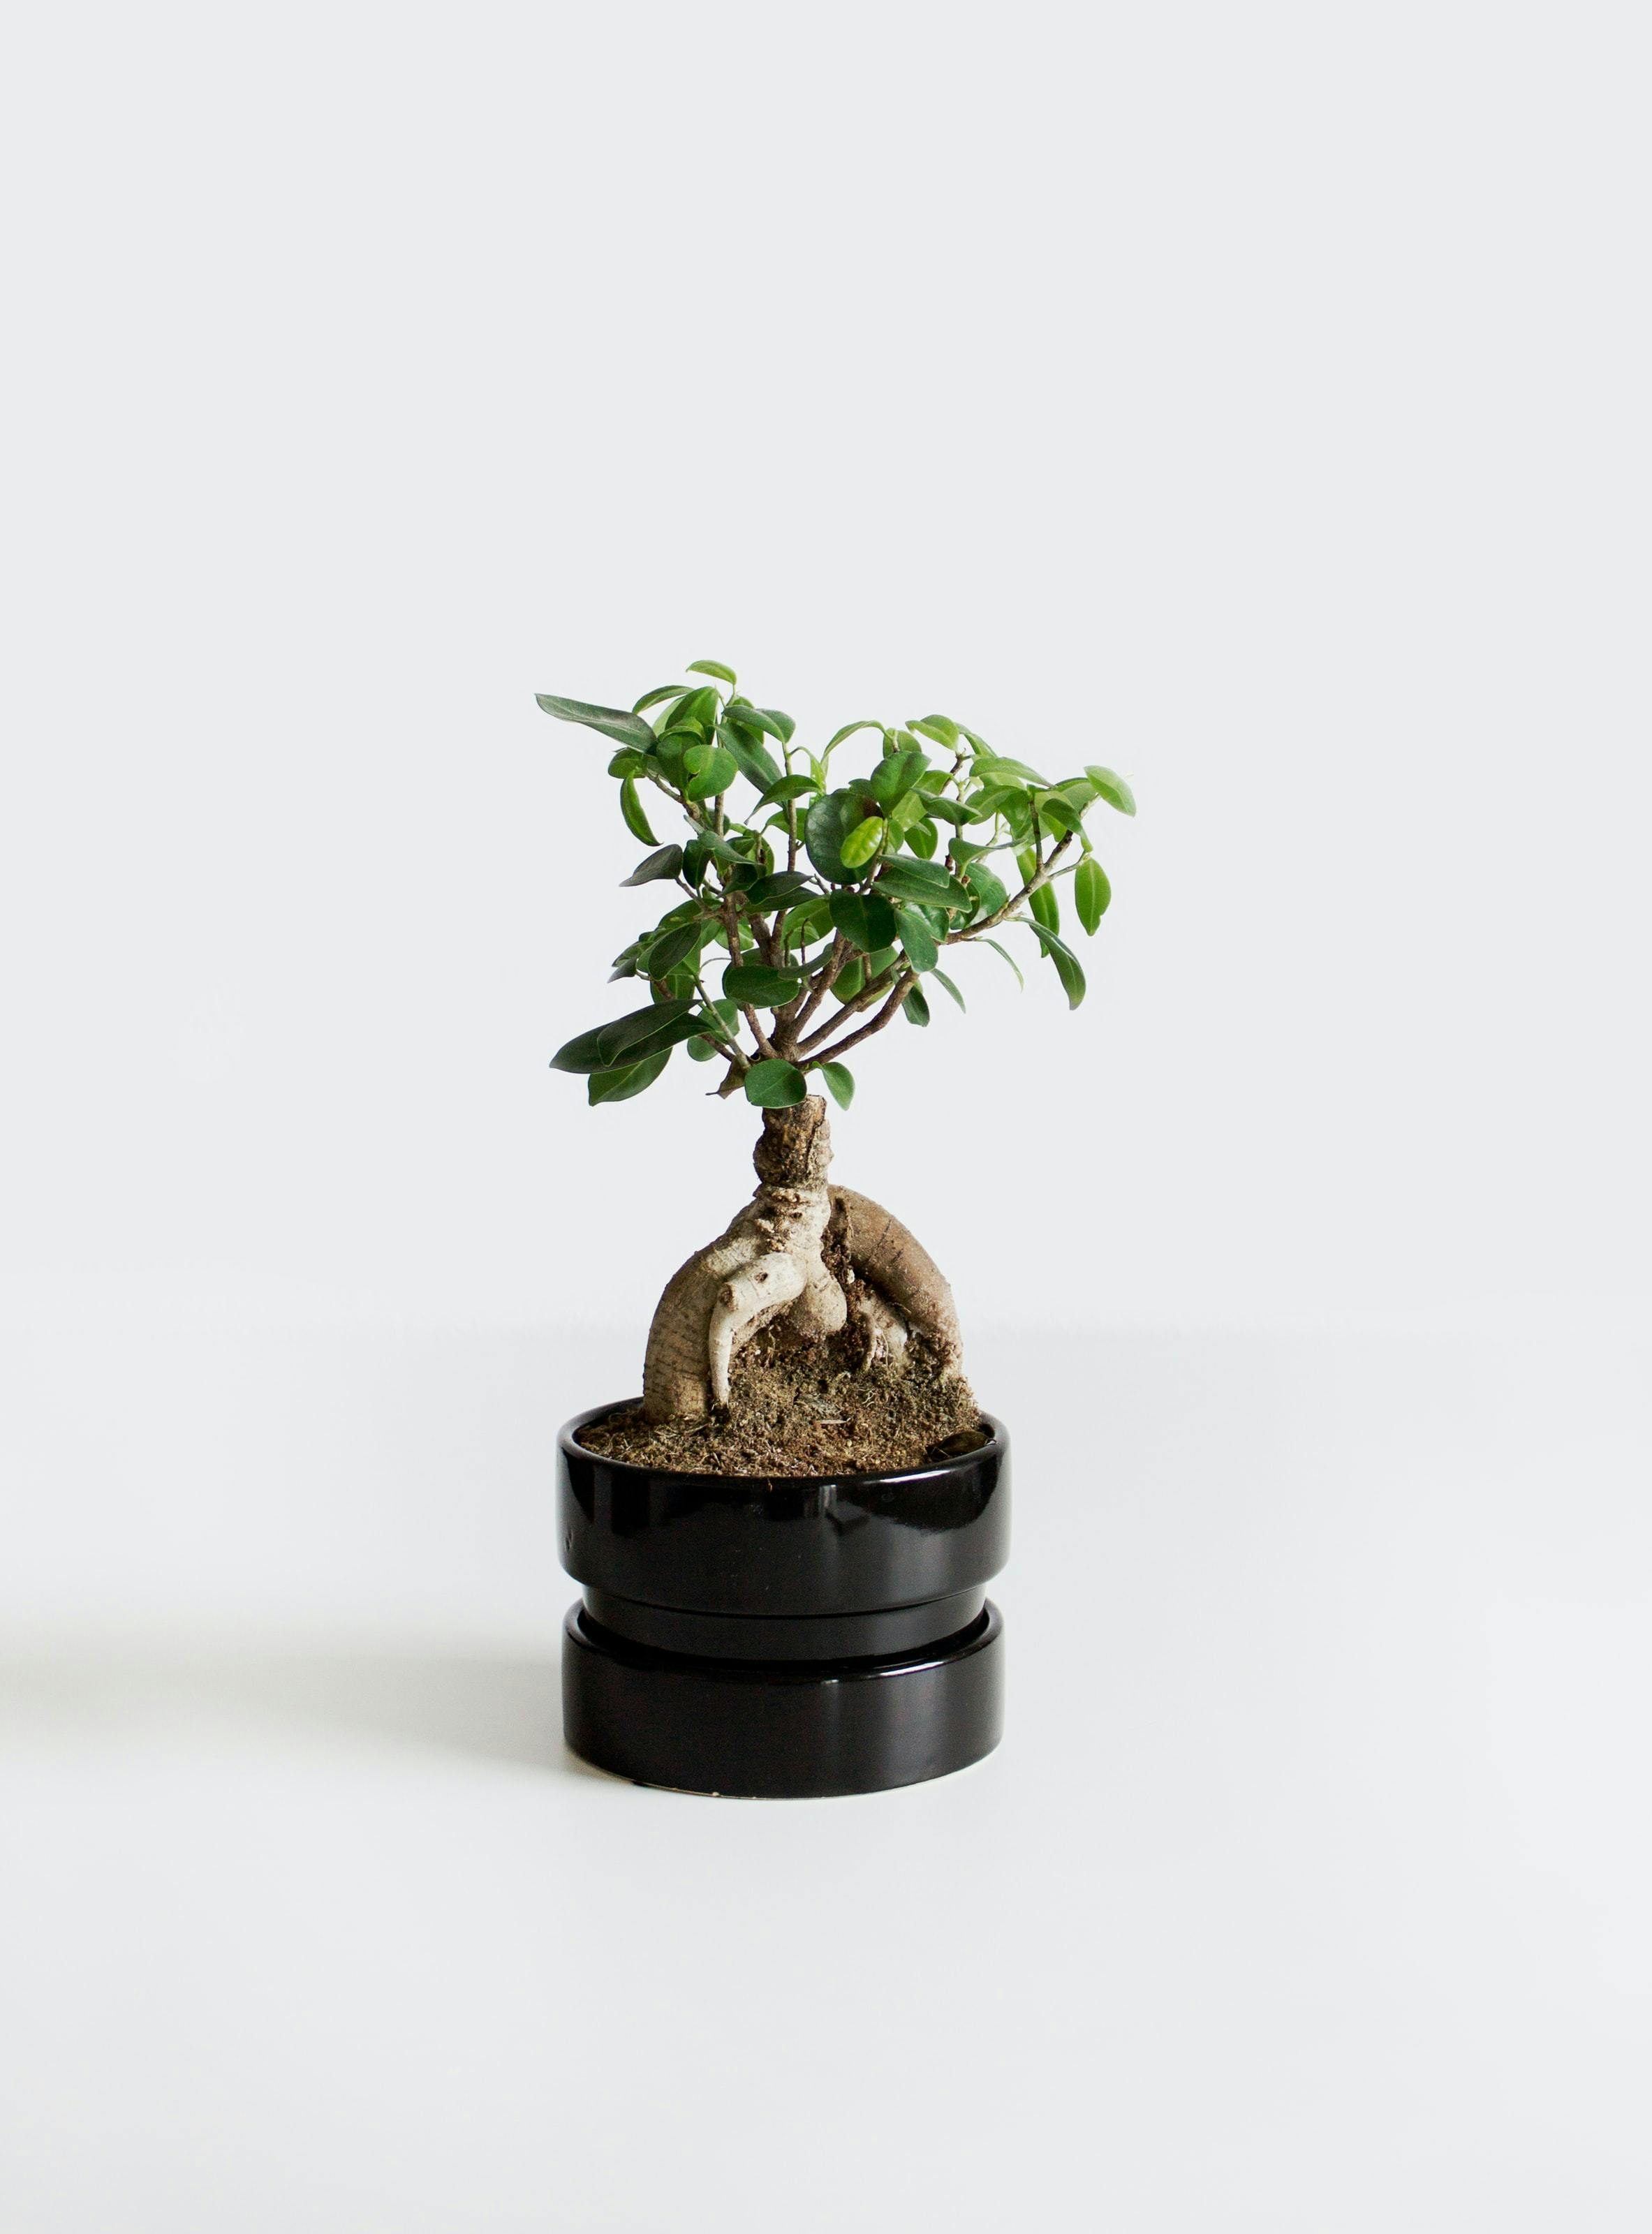 Bonsai Trees Stock Photos and Images  123RF